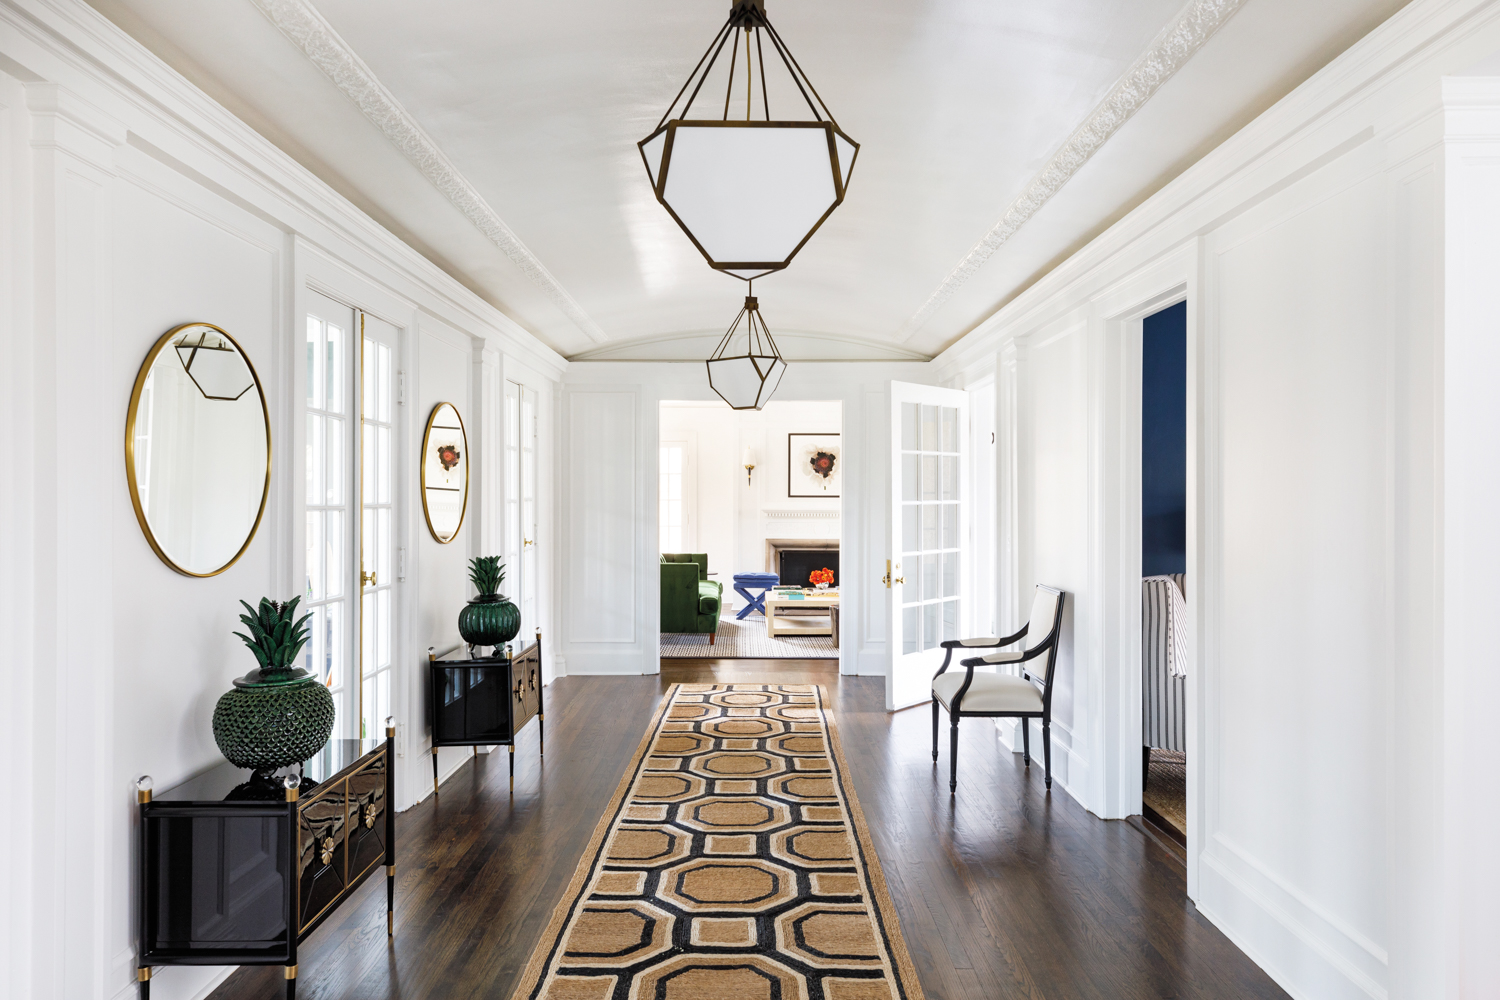 A white hallway with a cove ceiling and plaster molding details. A tan-and-black geometric rug runs the length of the hallway. Oversize geometric pendants hang from above.